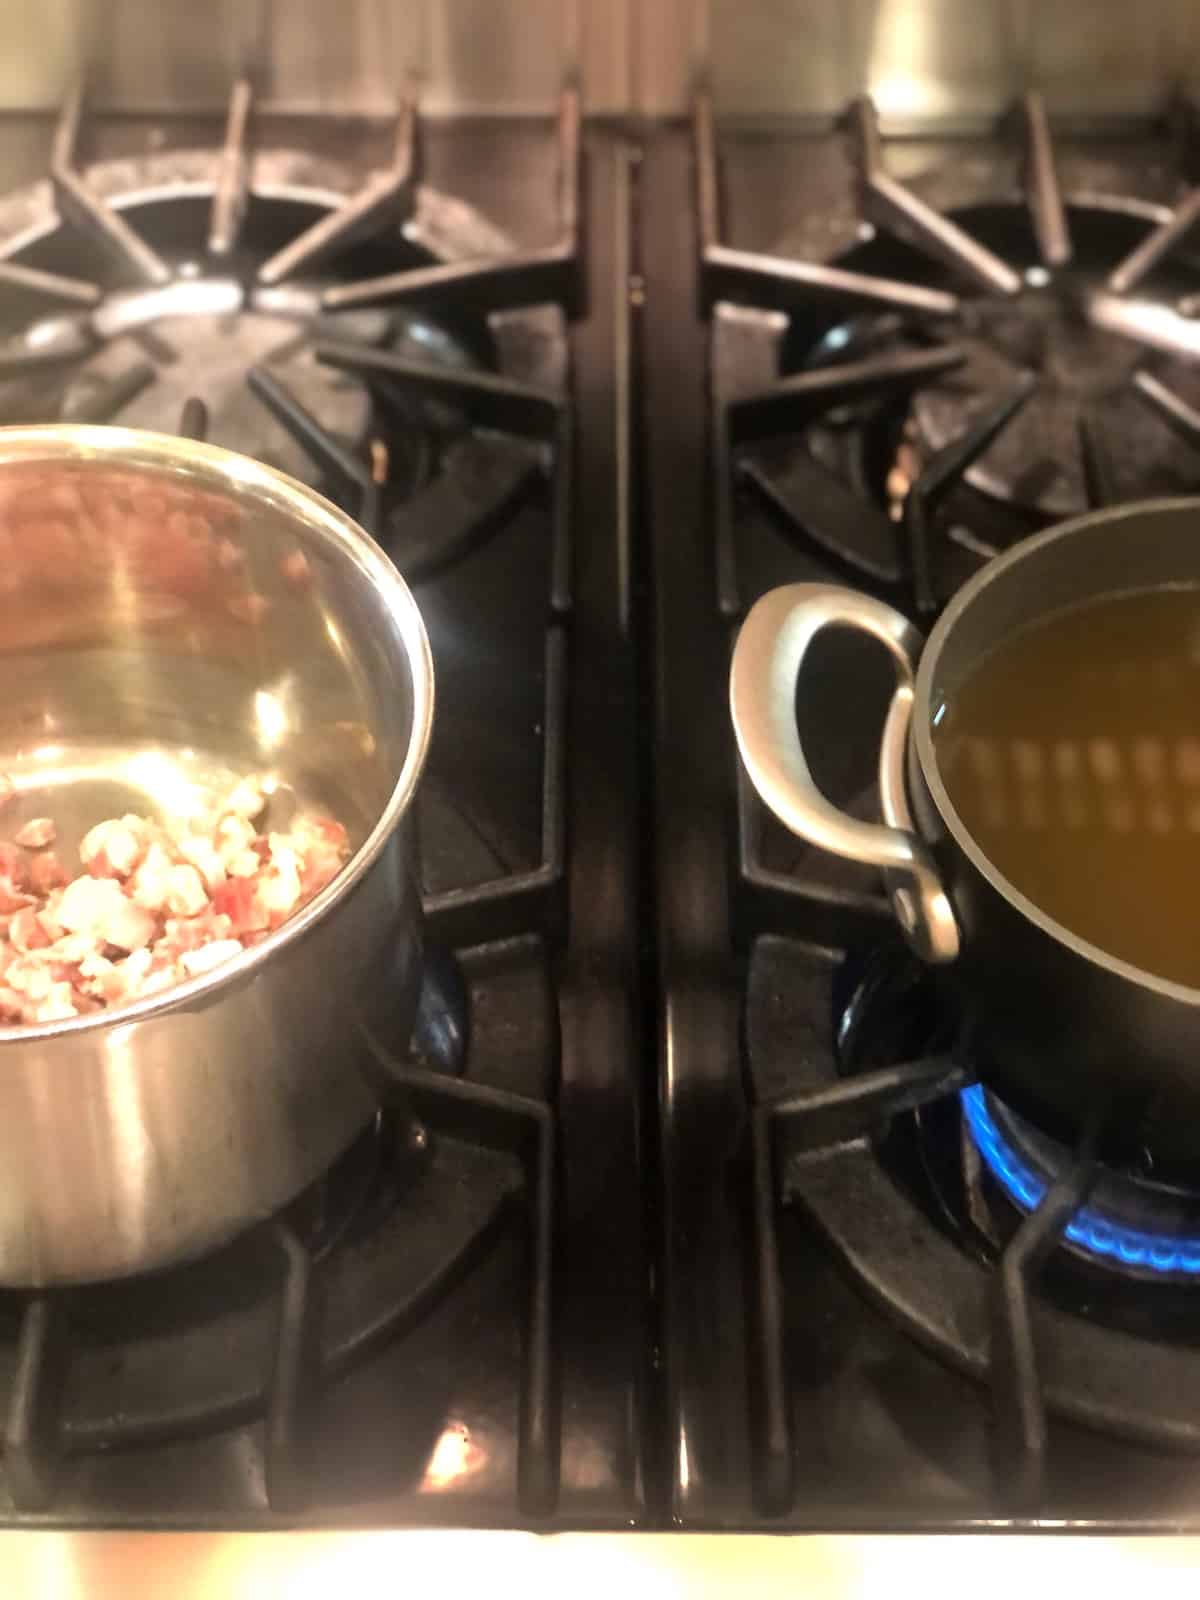 Two pots on the stovetop for cooking risotto